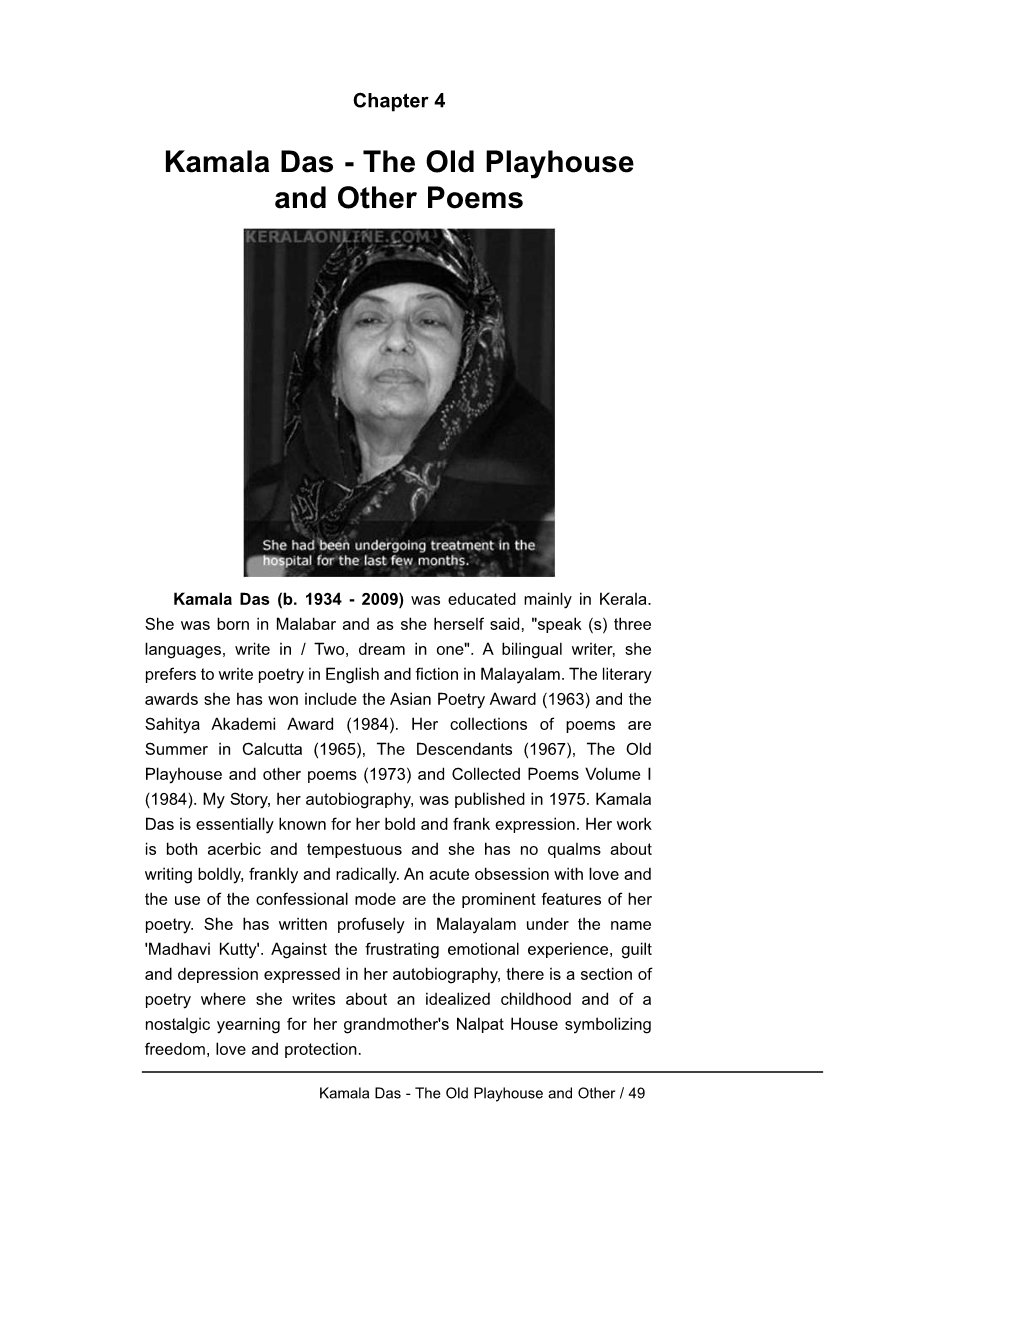 Kamala Das - the Old Playhouse and Other Poems